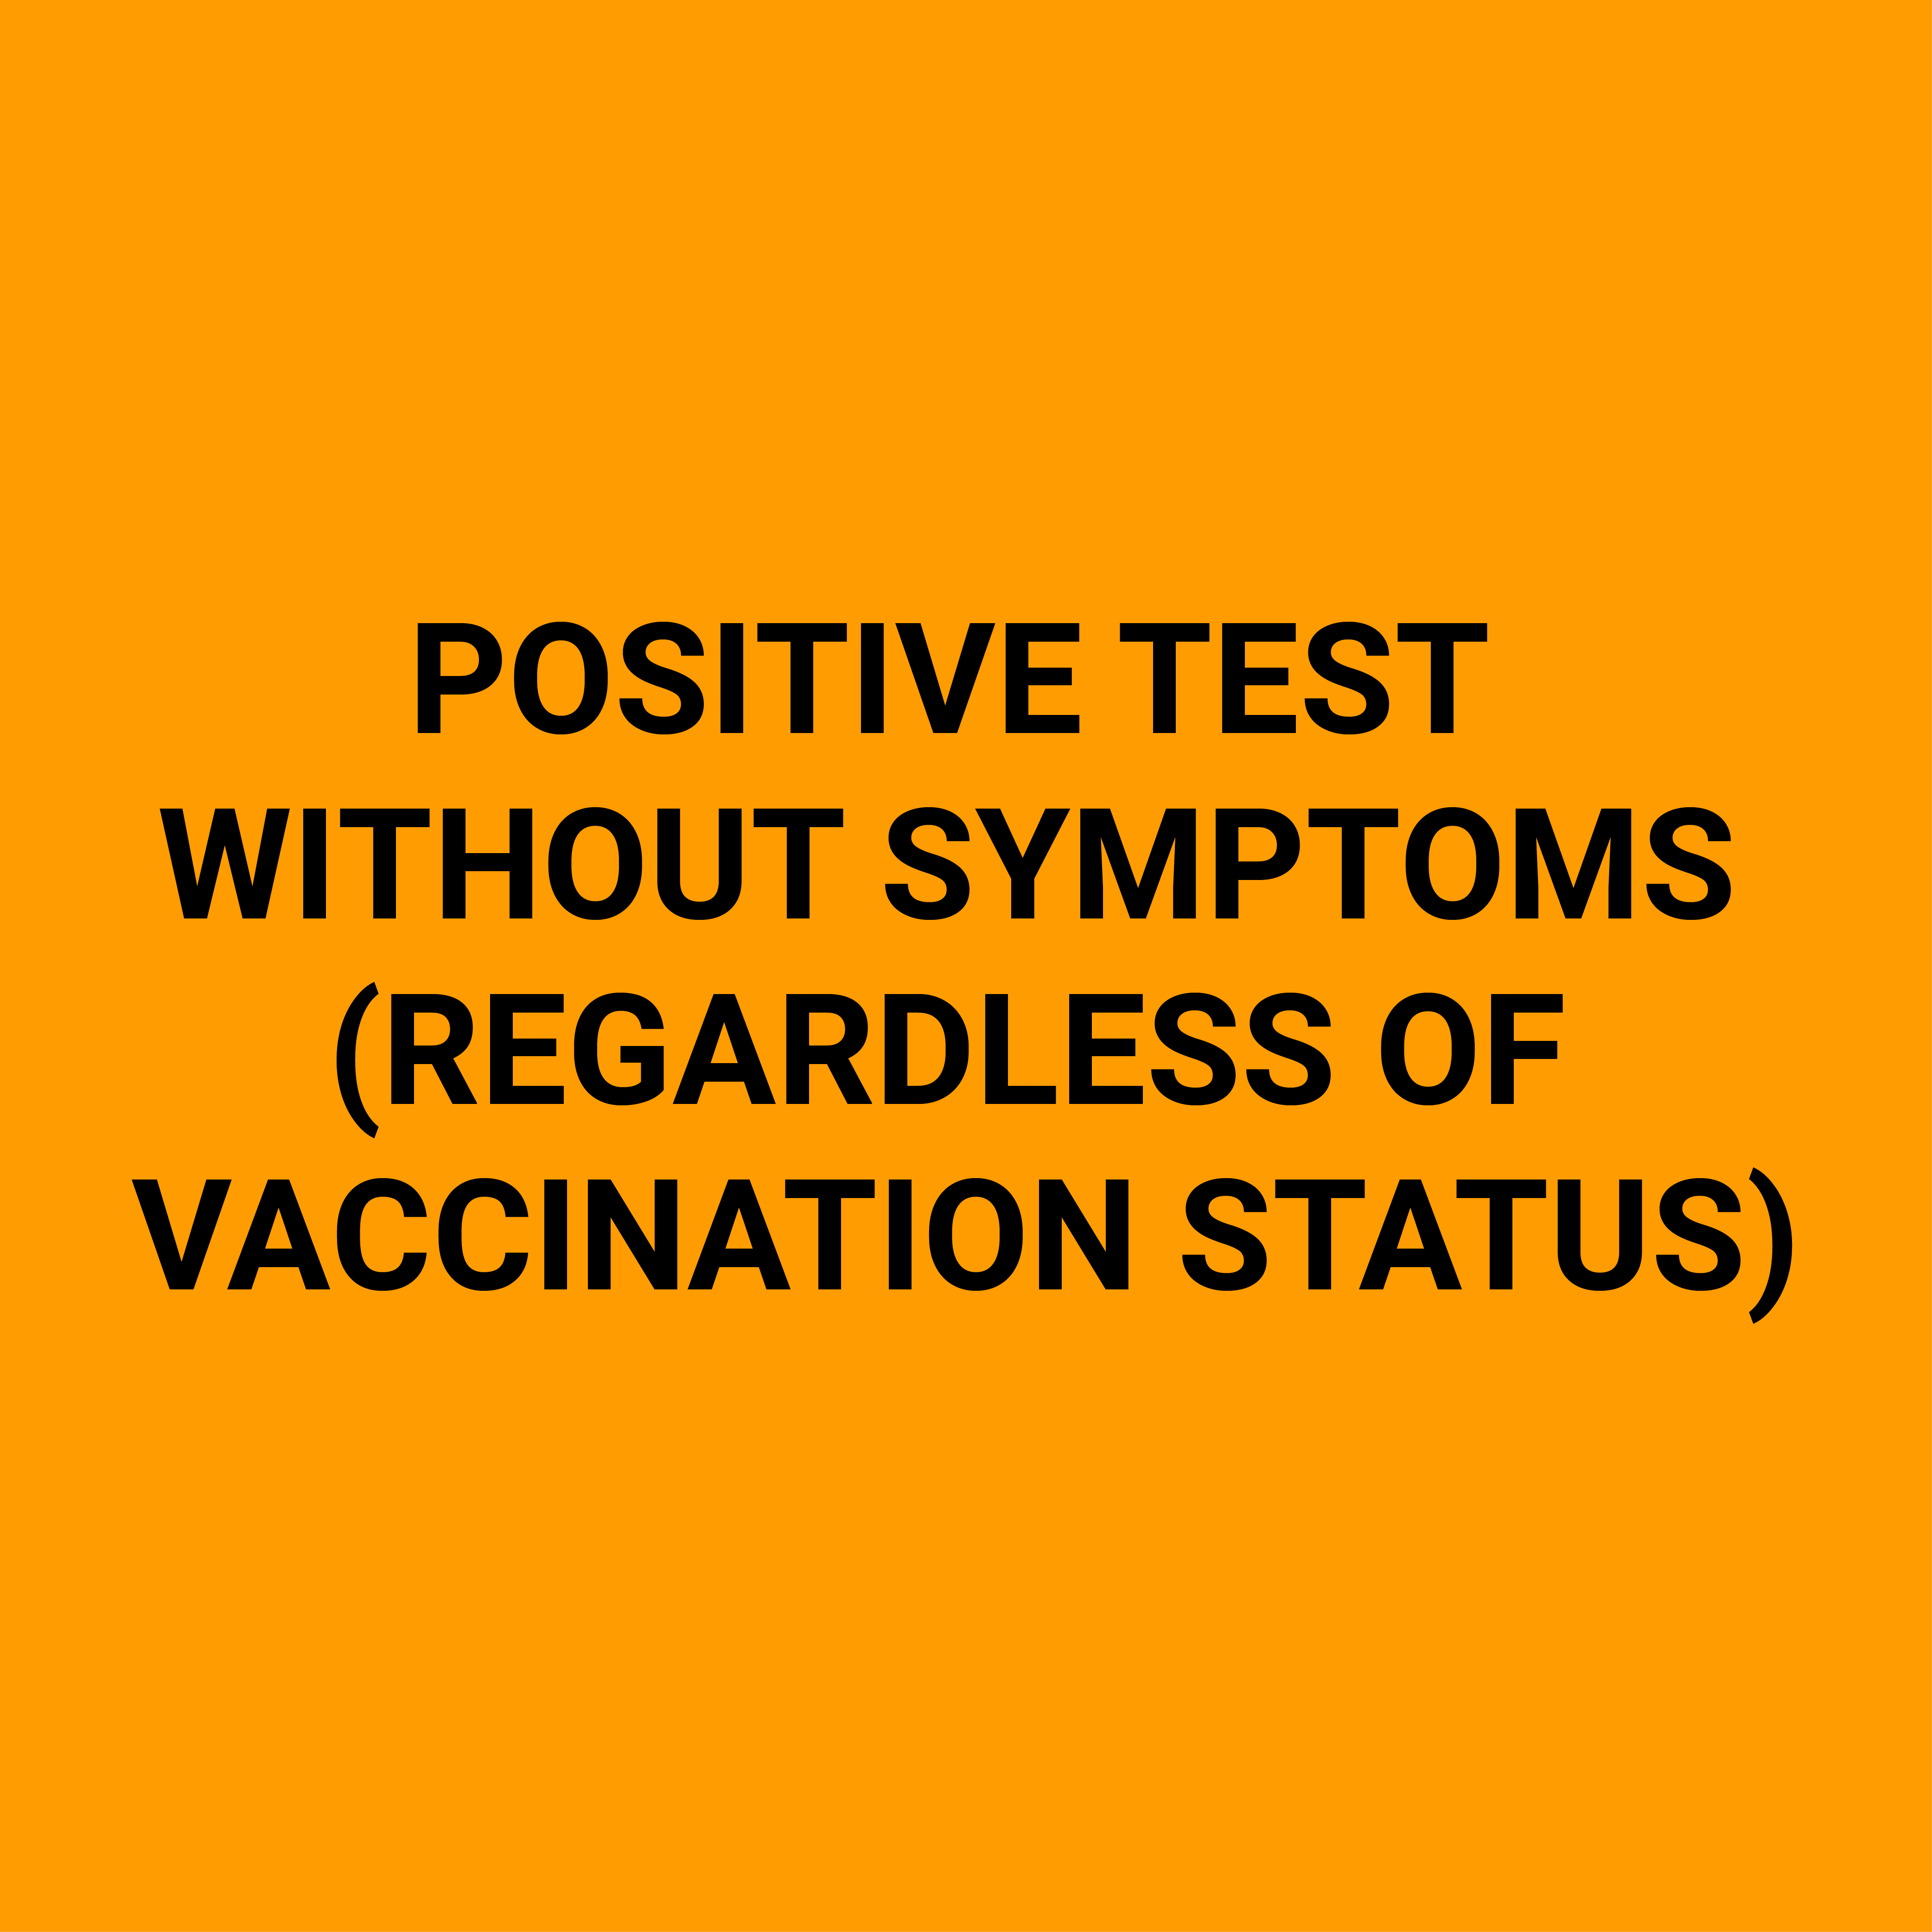 POSITIVE TEST WITHOUT SYMPTOMS (REGARDLESS OF VACCINATION STATUS)